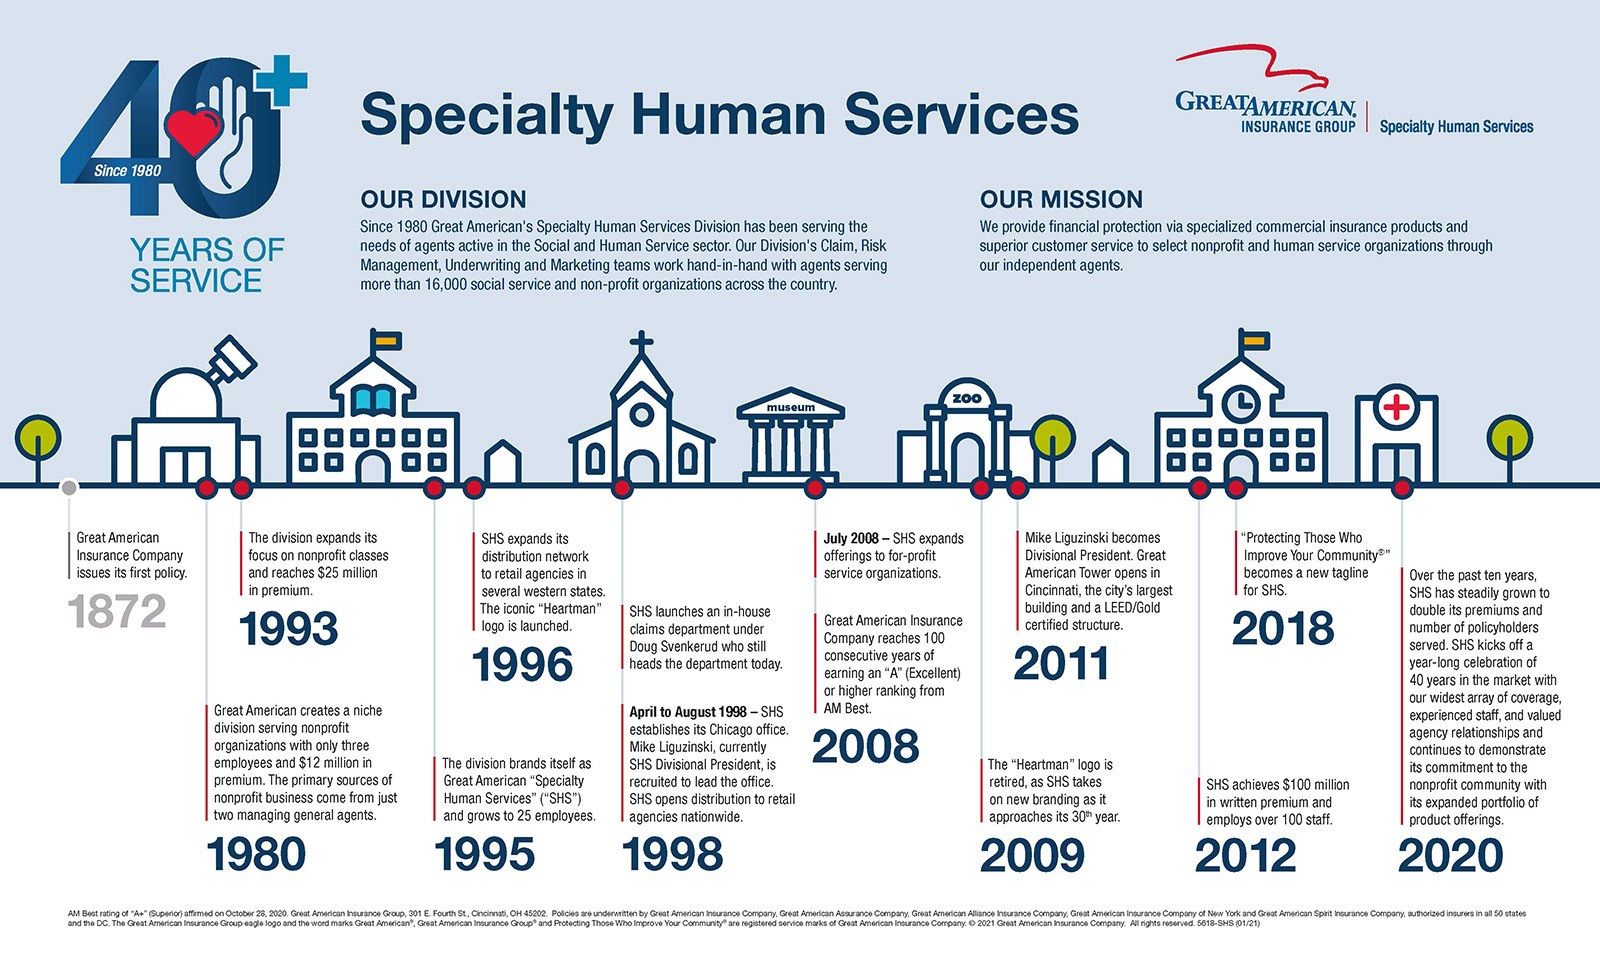 Specialty Human Services 40th+ Anniversary Timeline